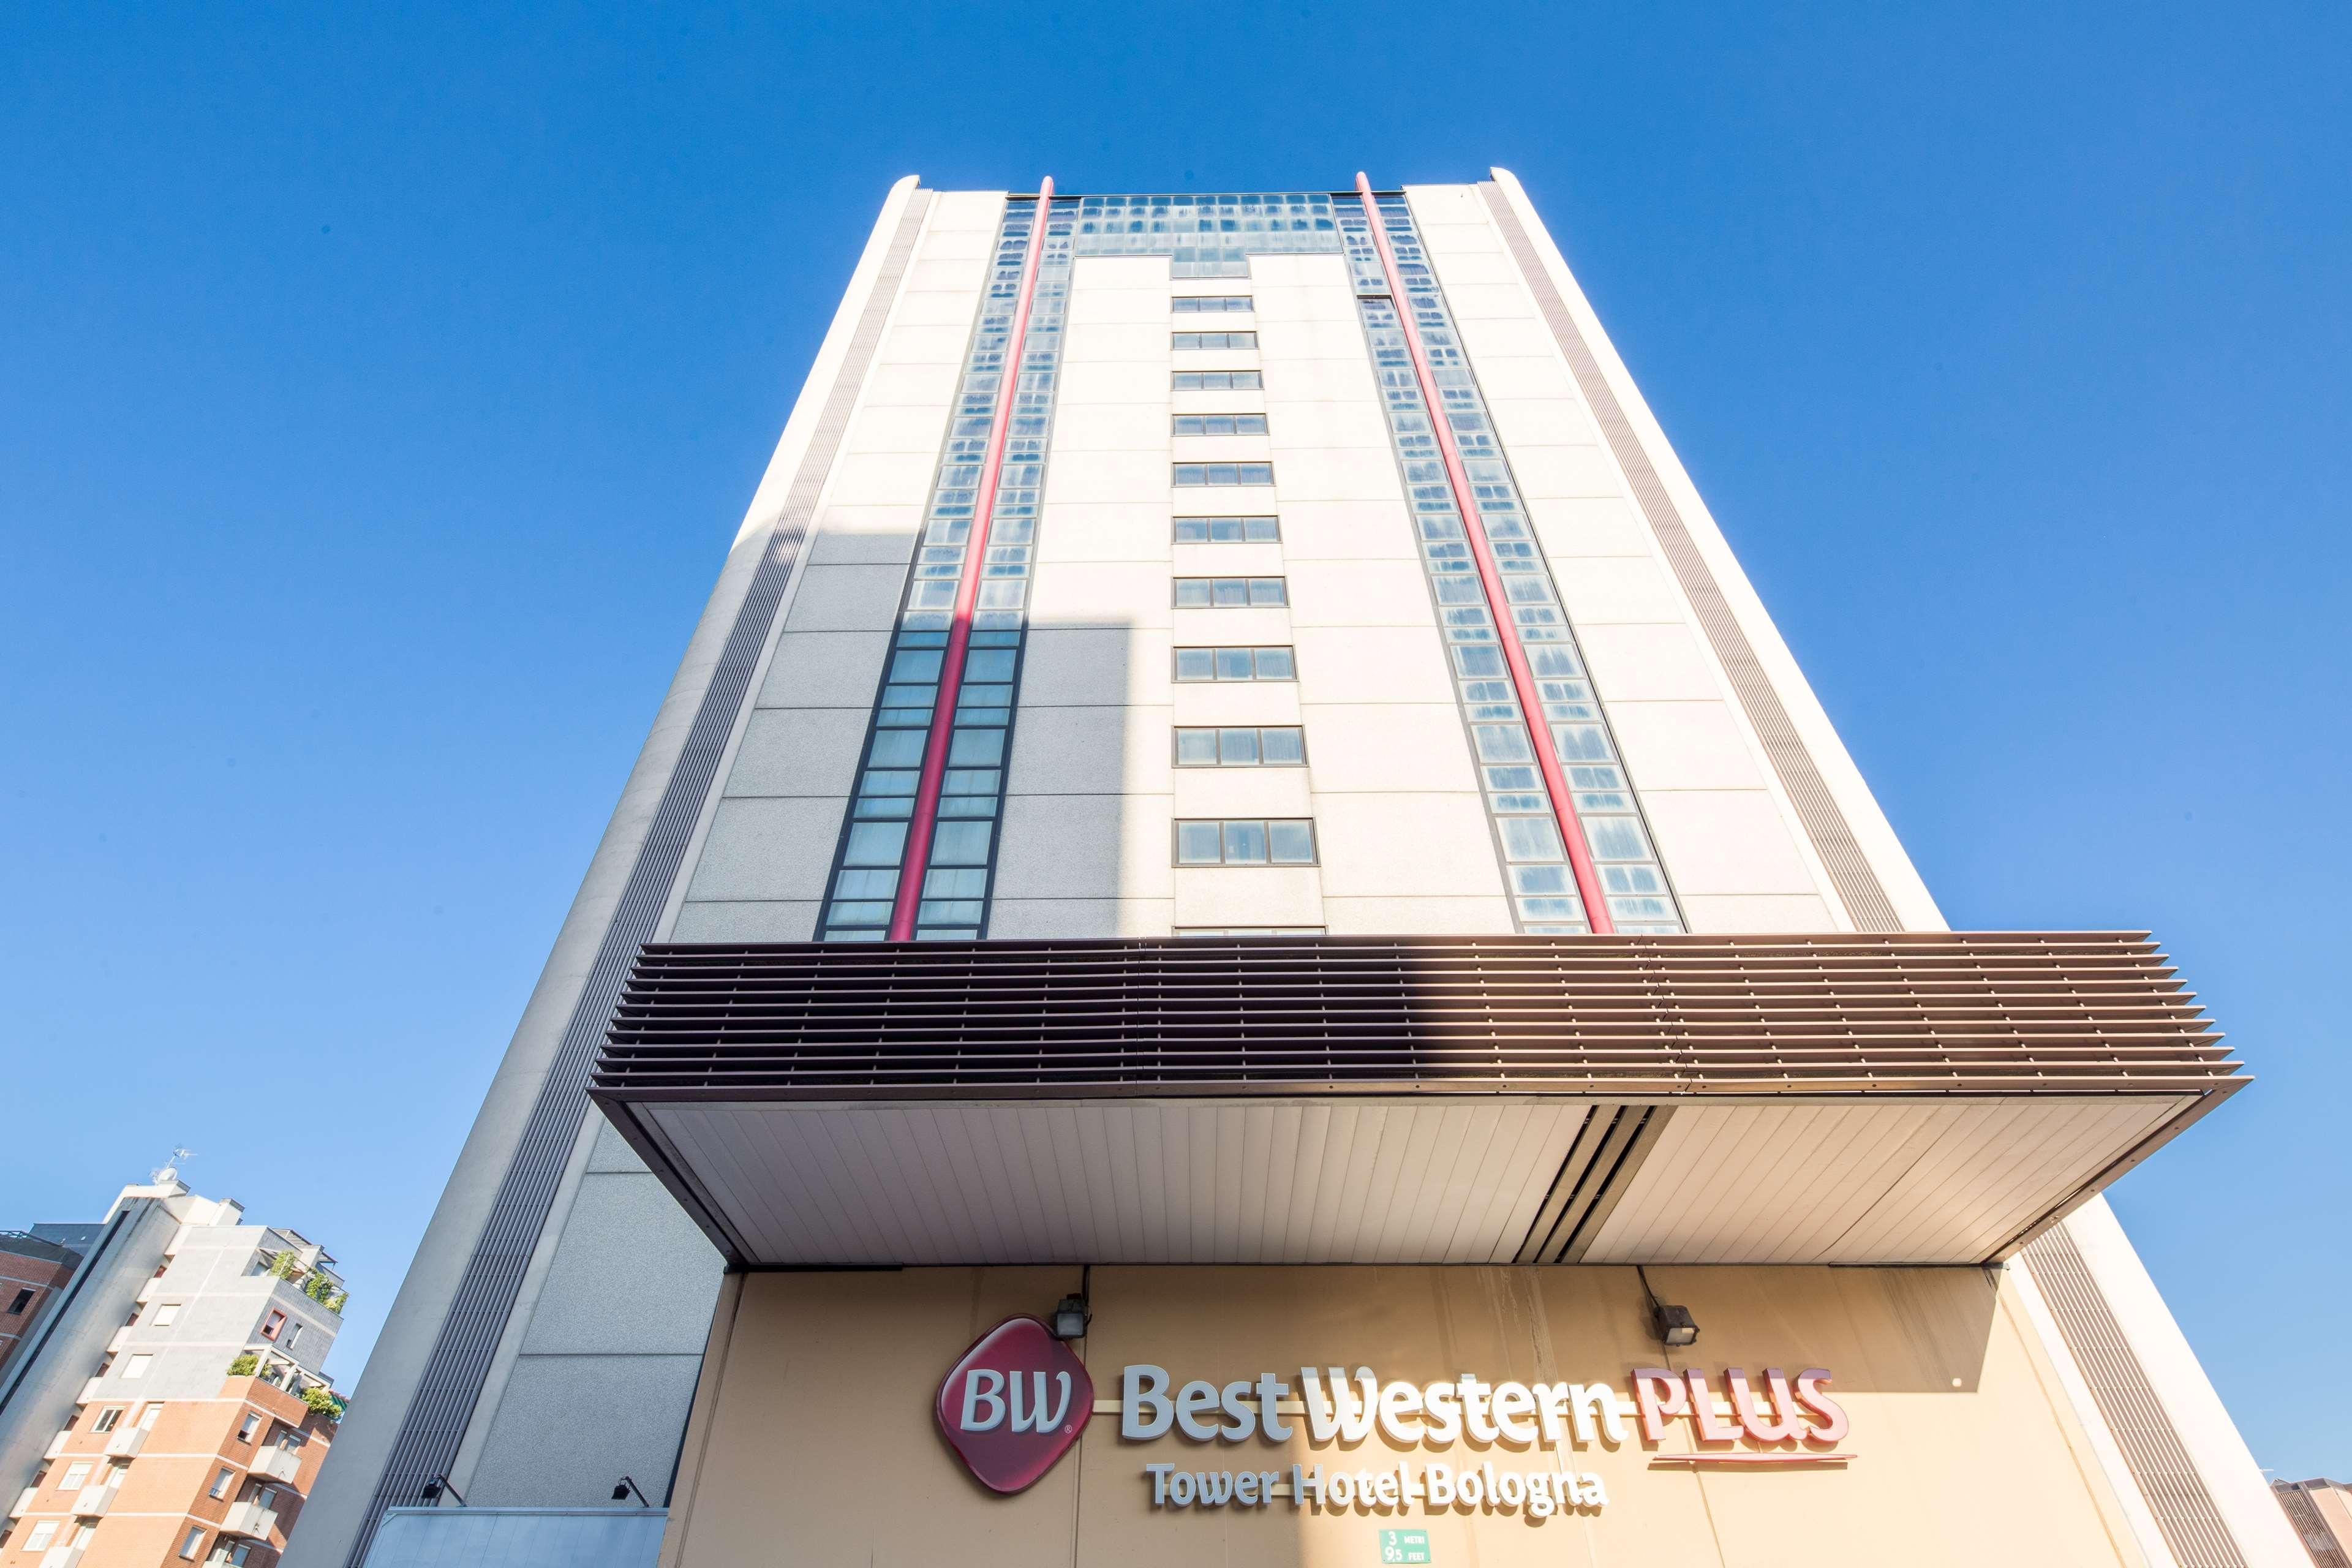 Best Western Plus Tower Hotel Bologna Exterior photo